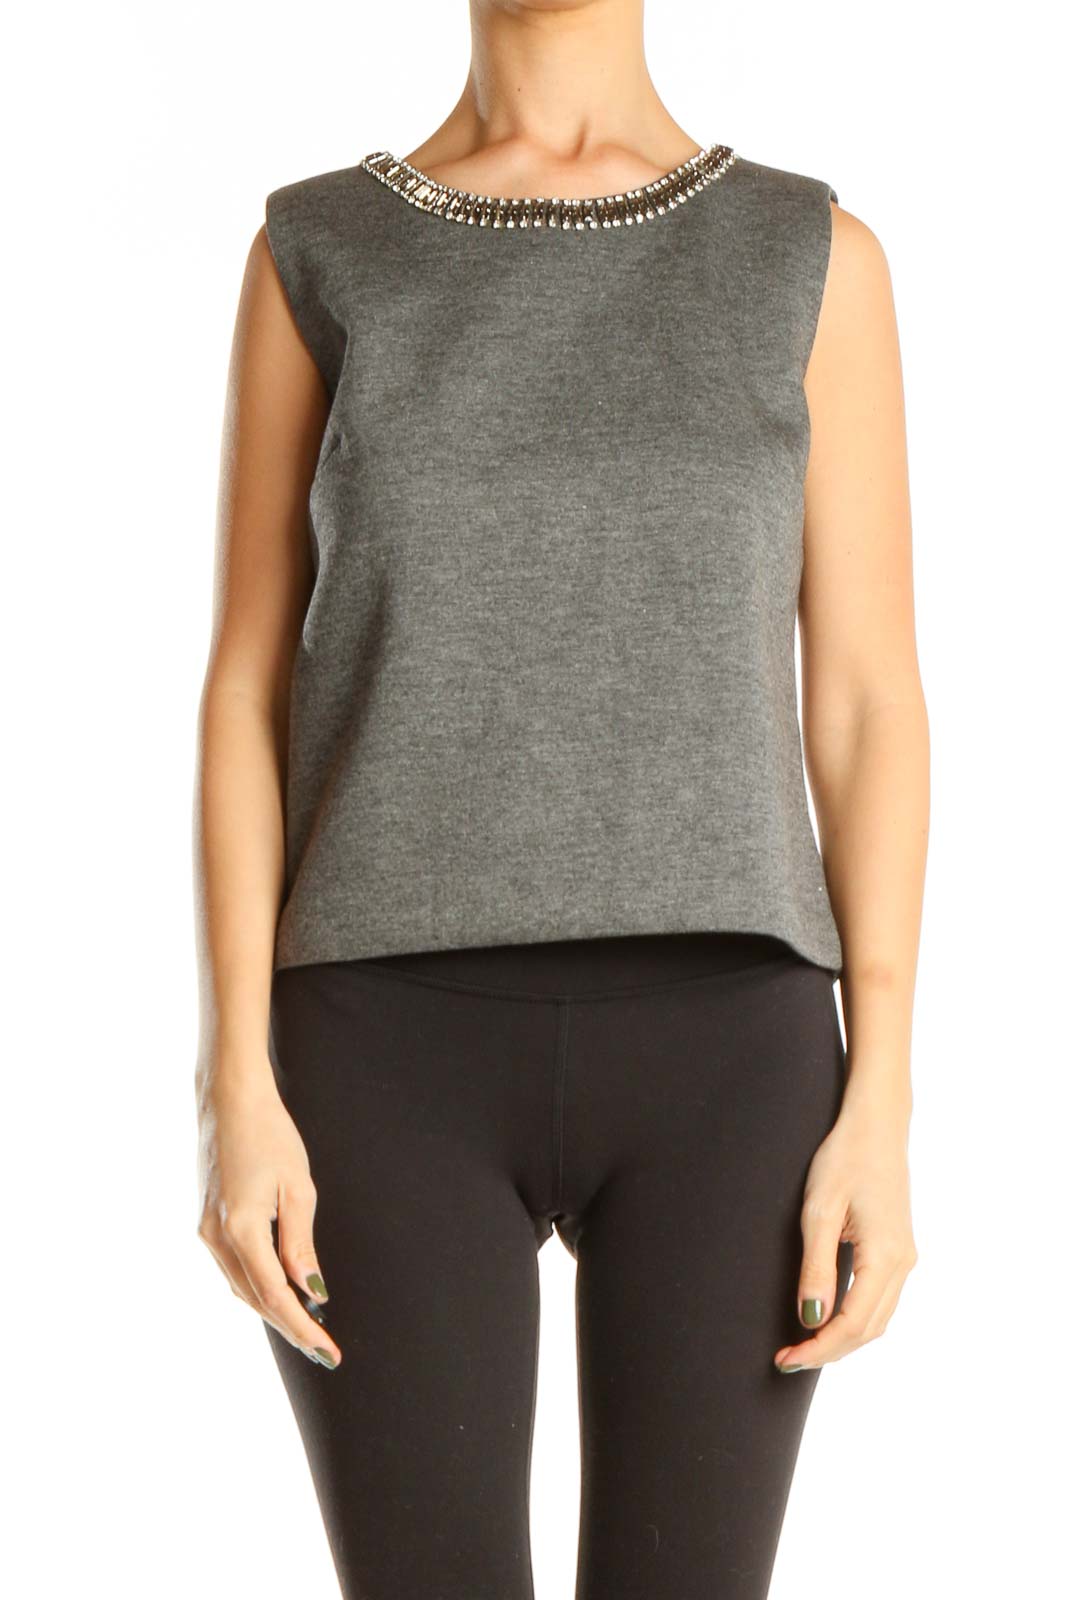 Gray Chic Top with Sequin Neckline Front